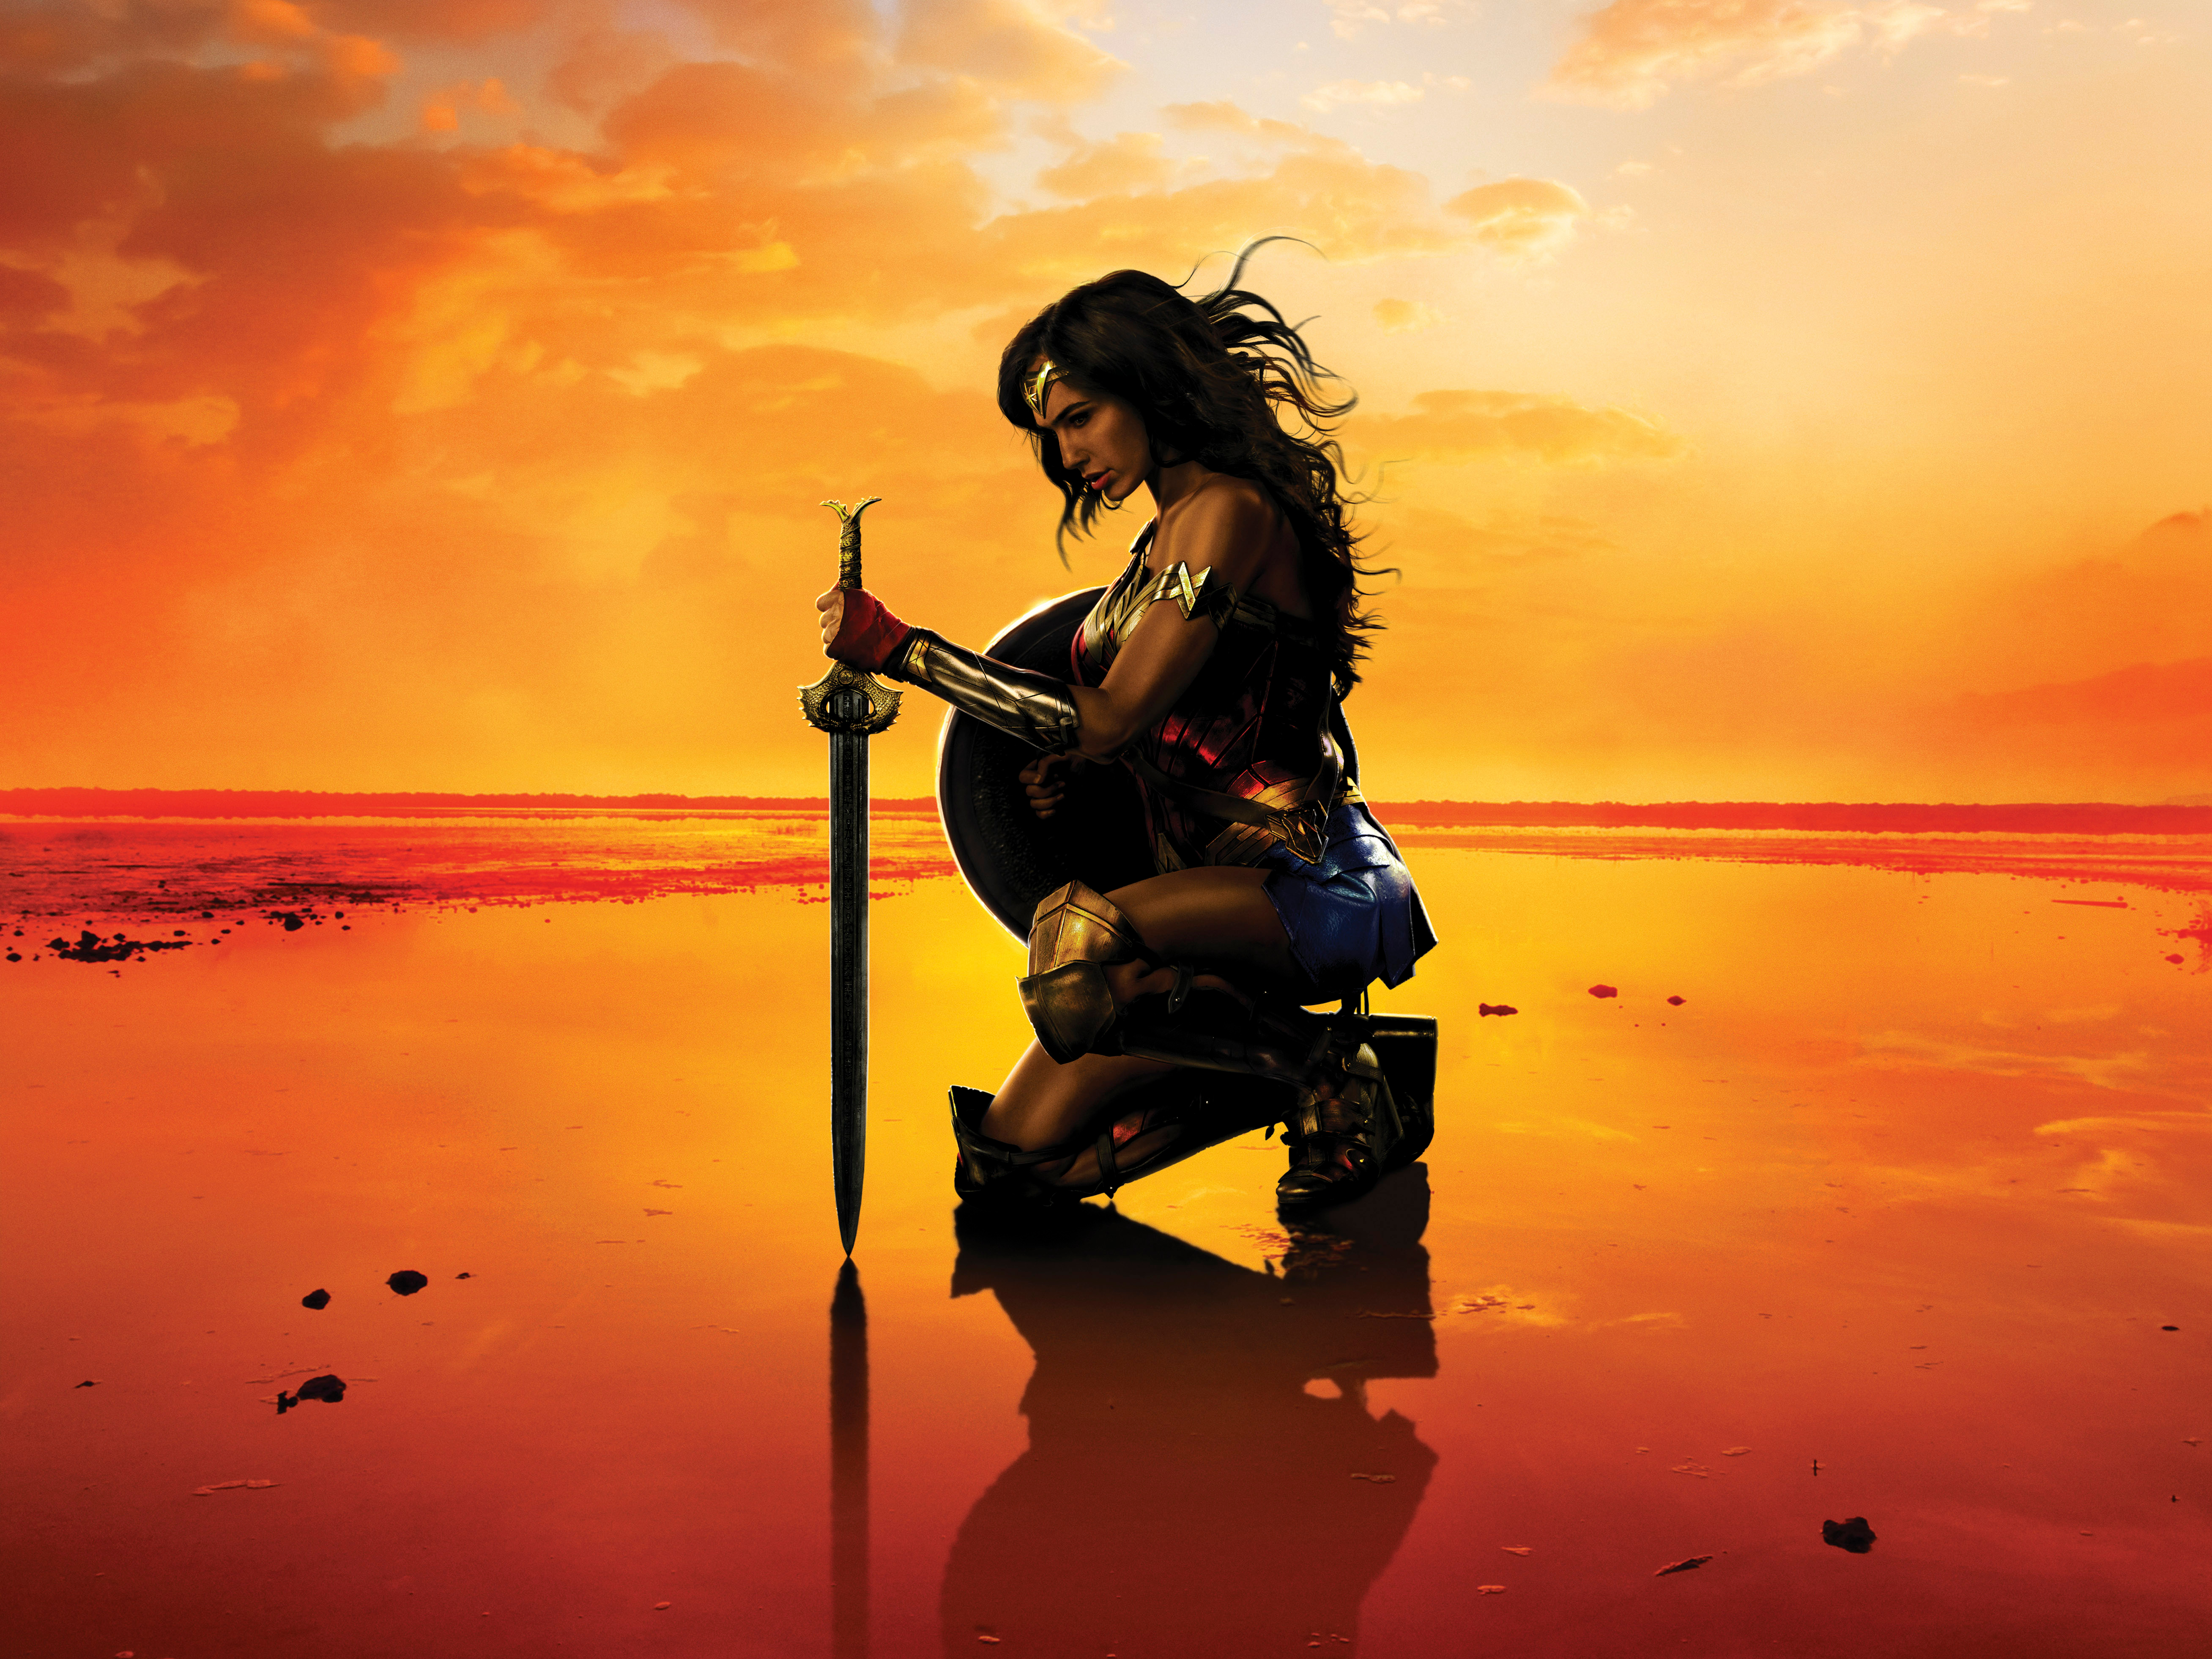 130+ Wonder Woman HD Wallpapers and Backgrounds